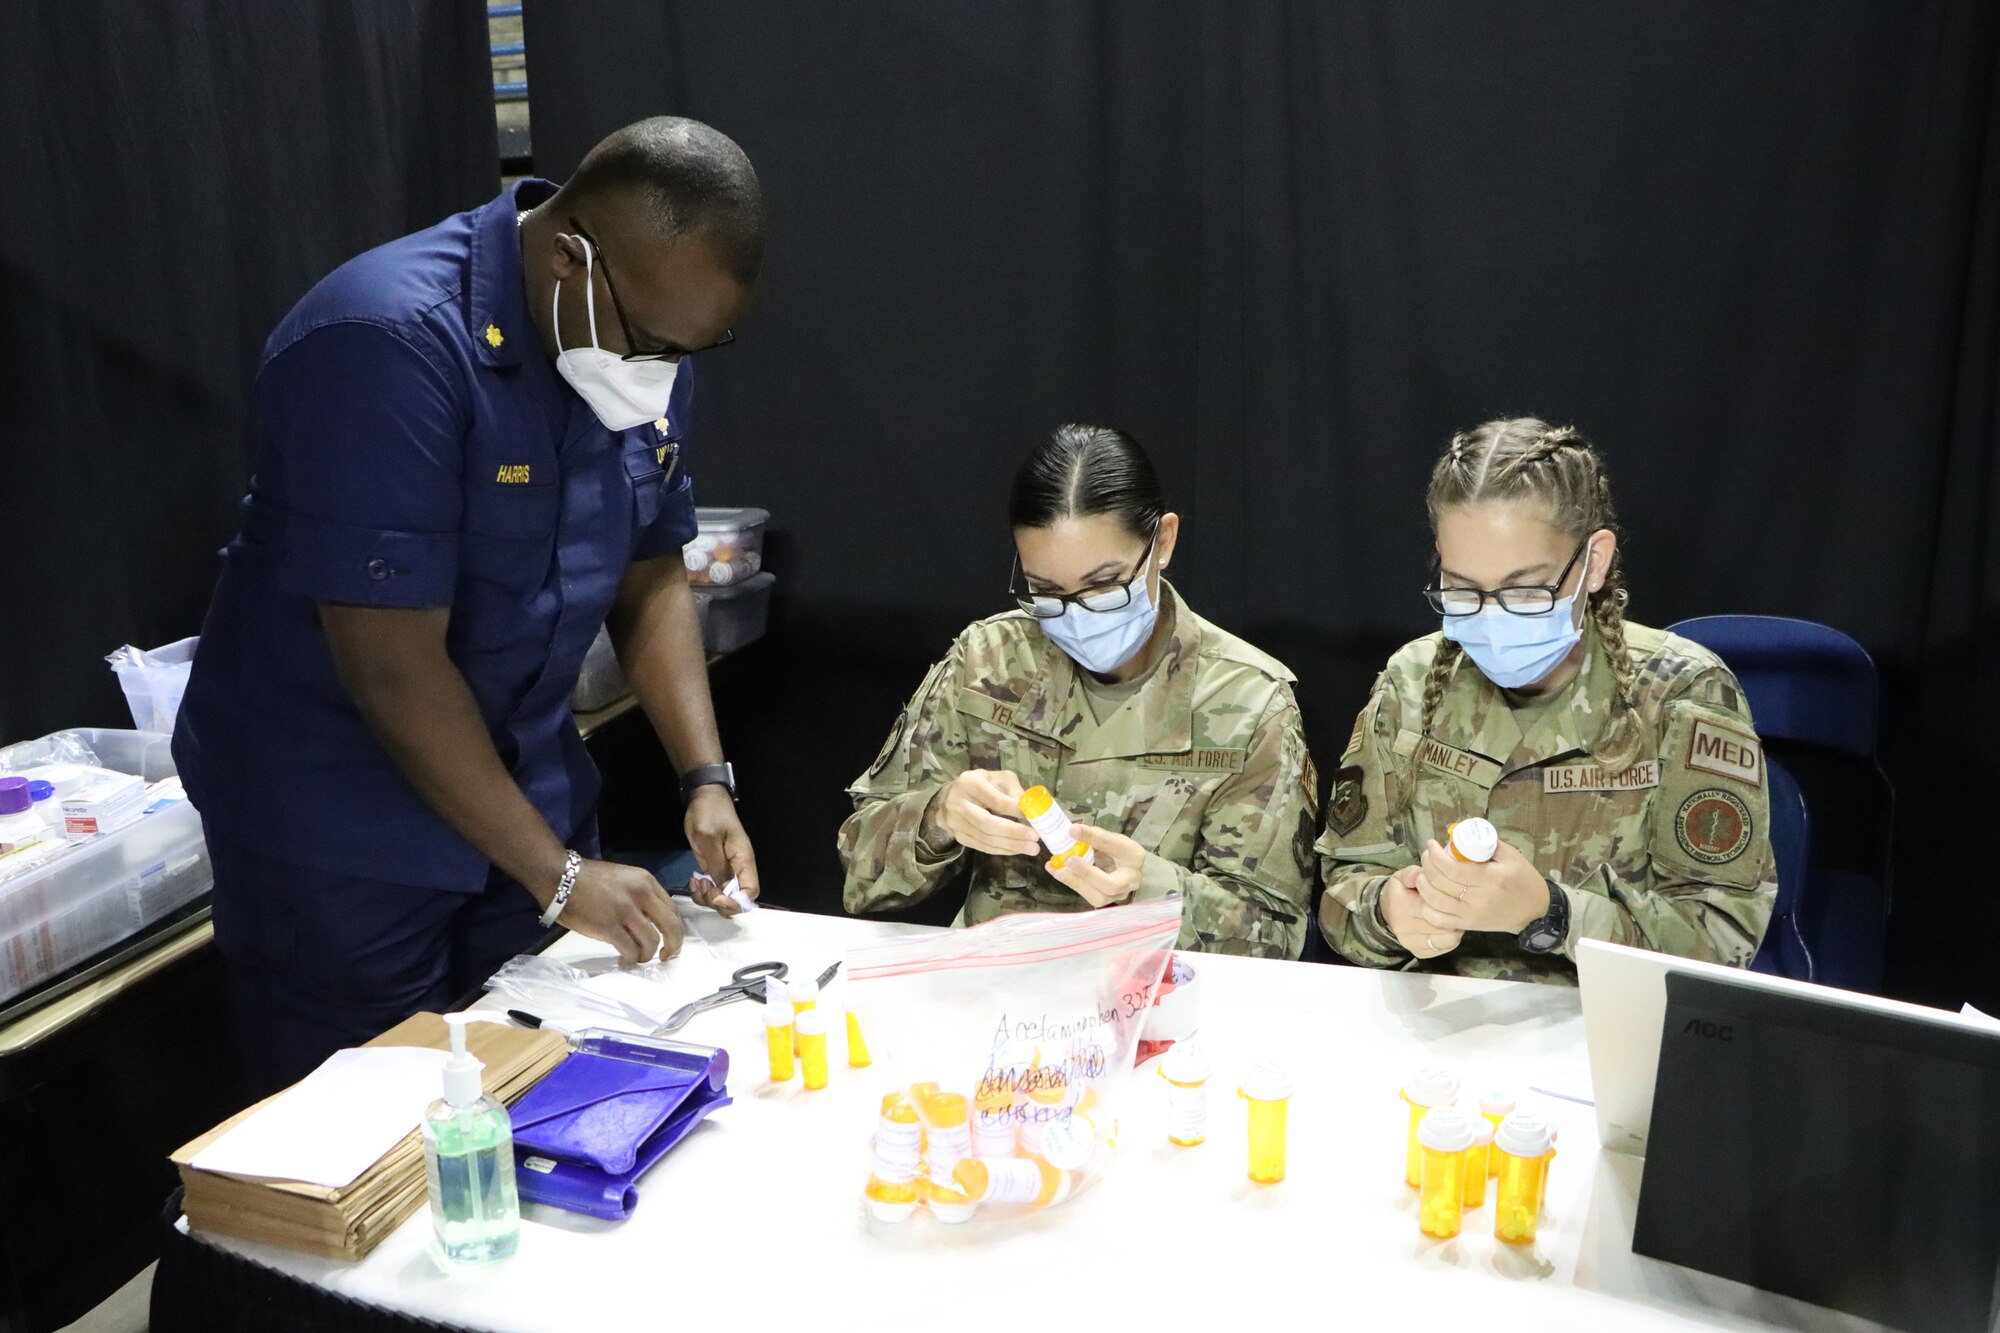 Airmen of the 102nd Medical Group, Otis ANGB, Mass., joined with Soldiers, Sailors and members of the U.S. Public Health Service to participate in Innovative Readiness Training in Georgia and Alabama in August 2022. The annual event connects the need for required, real-world training with resources provided by the civilian community to bring care to residents in need.